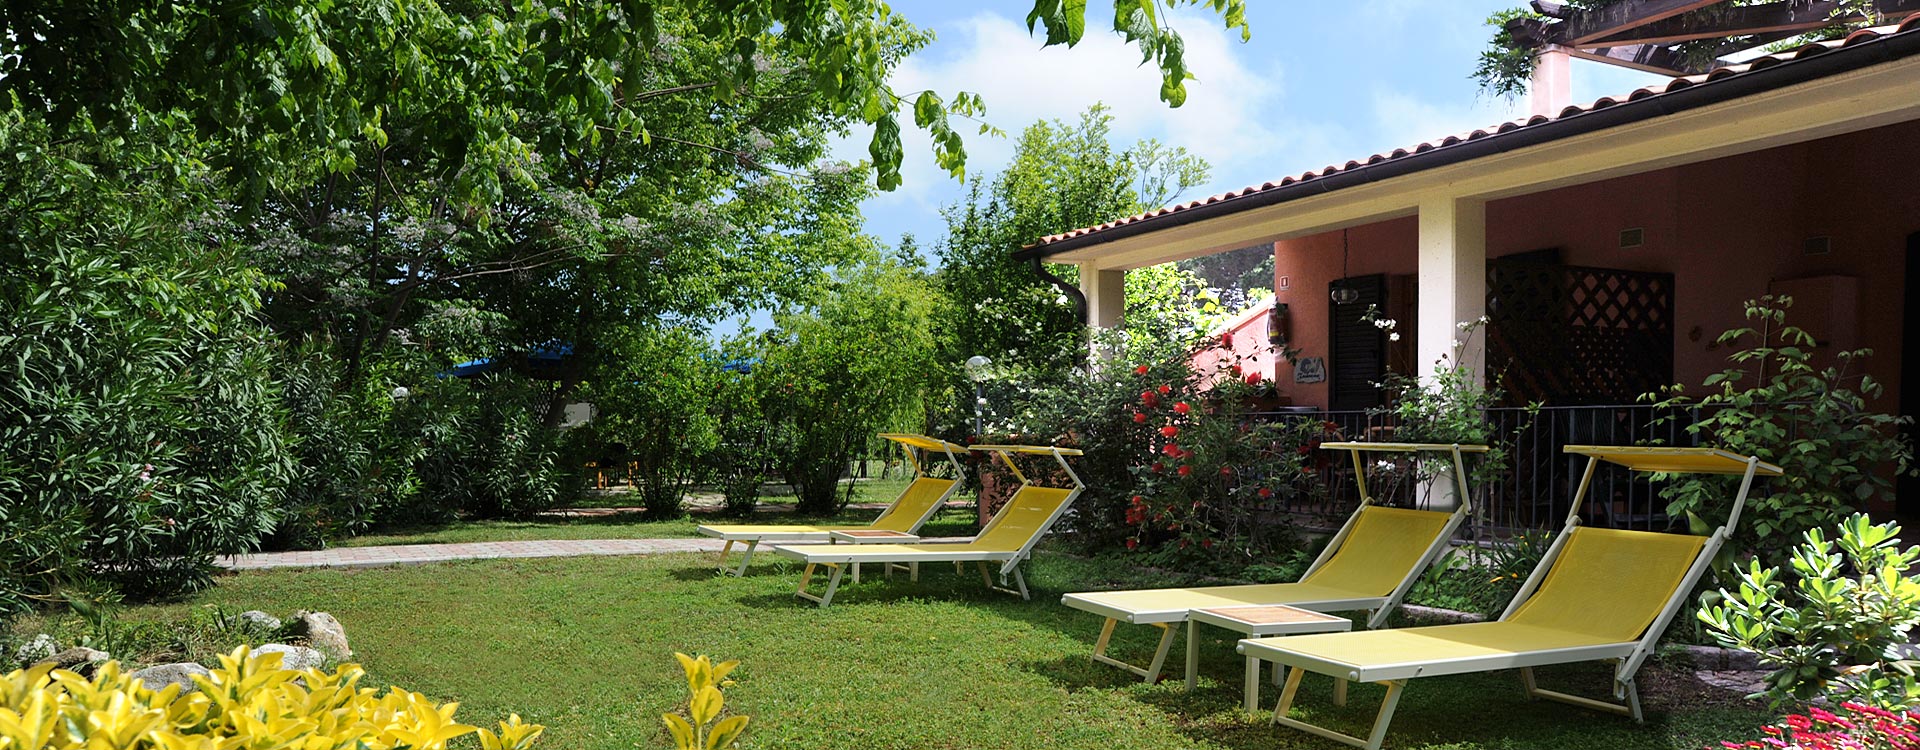 Holiday apartments on the Island of Elba